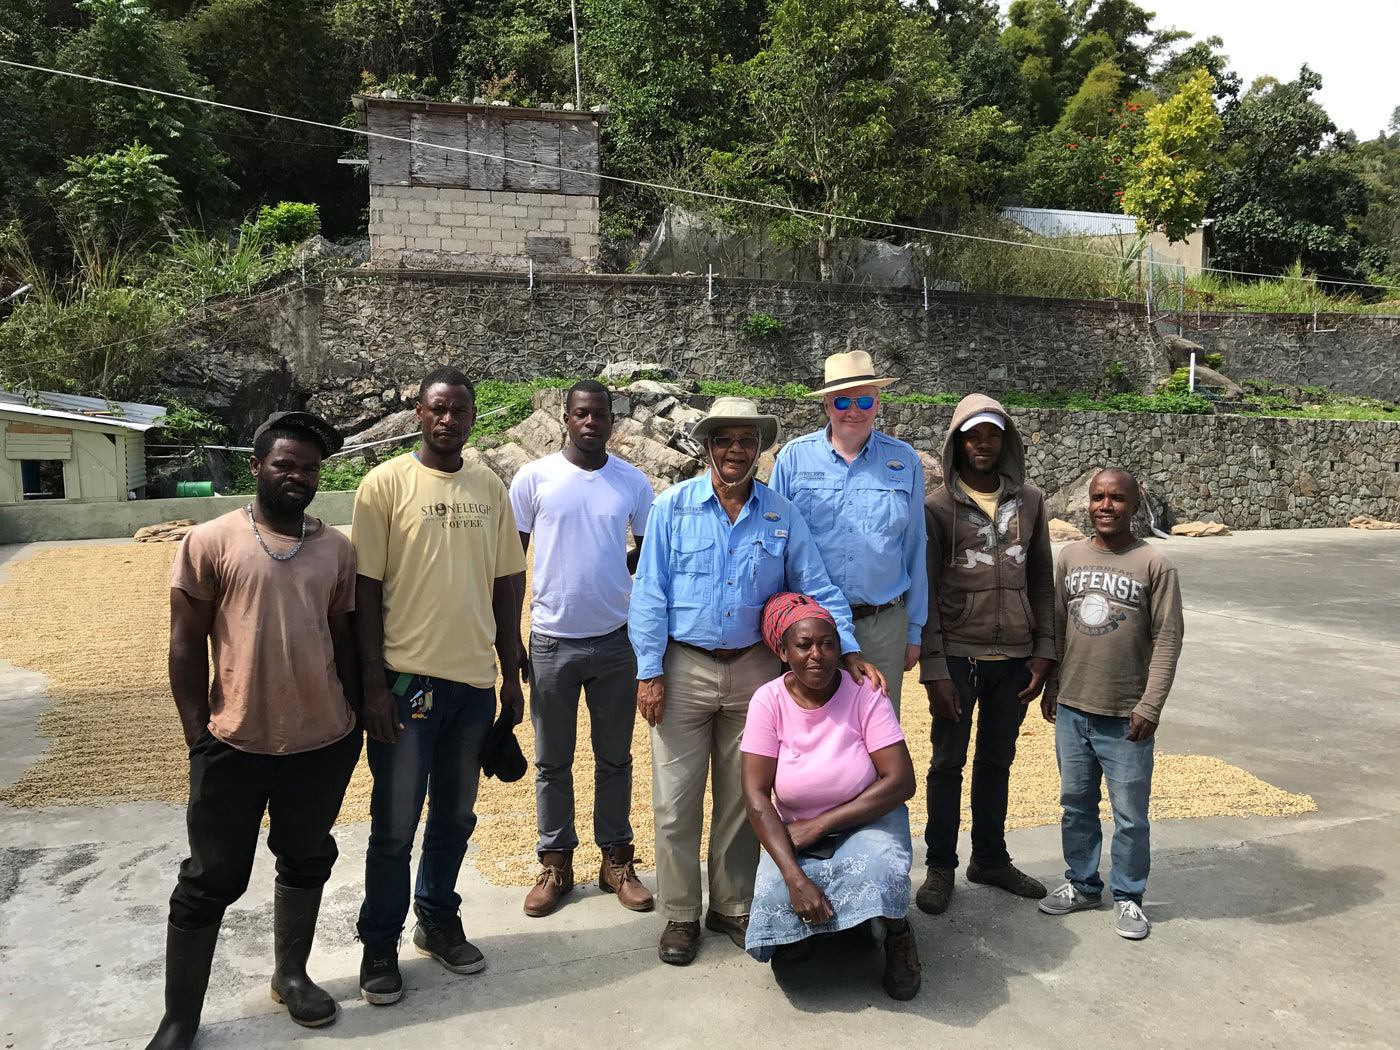 Farm workers smiling next to dried Jamaica Blue Mountain coffee beans at Stoneleigh estate